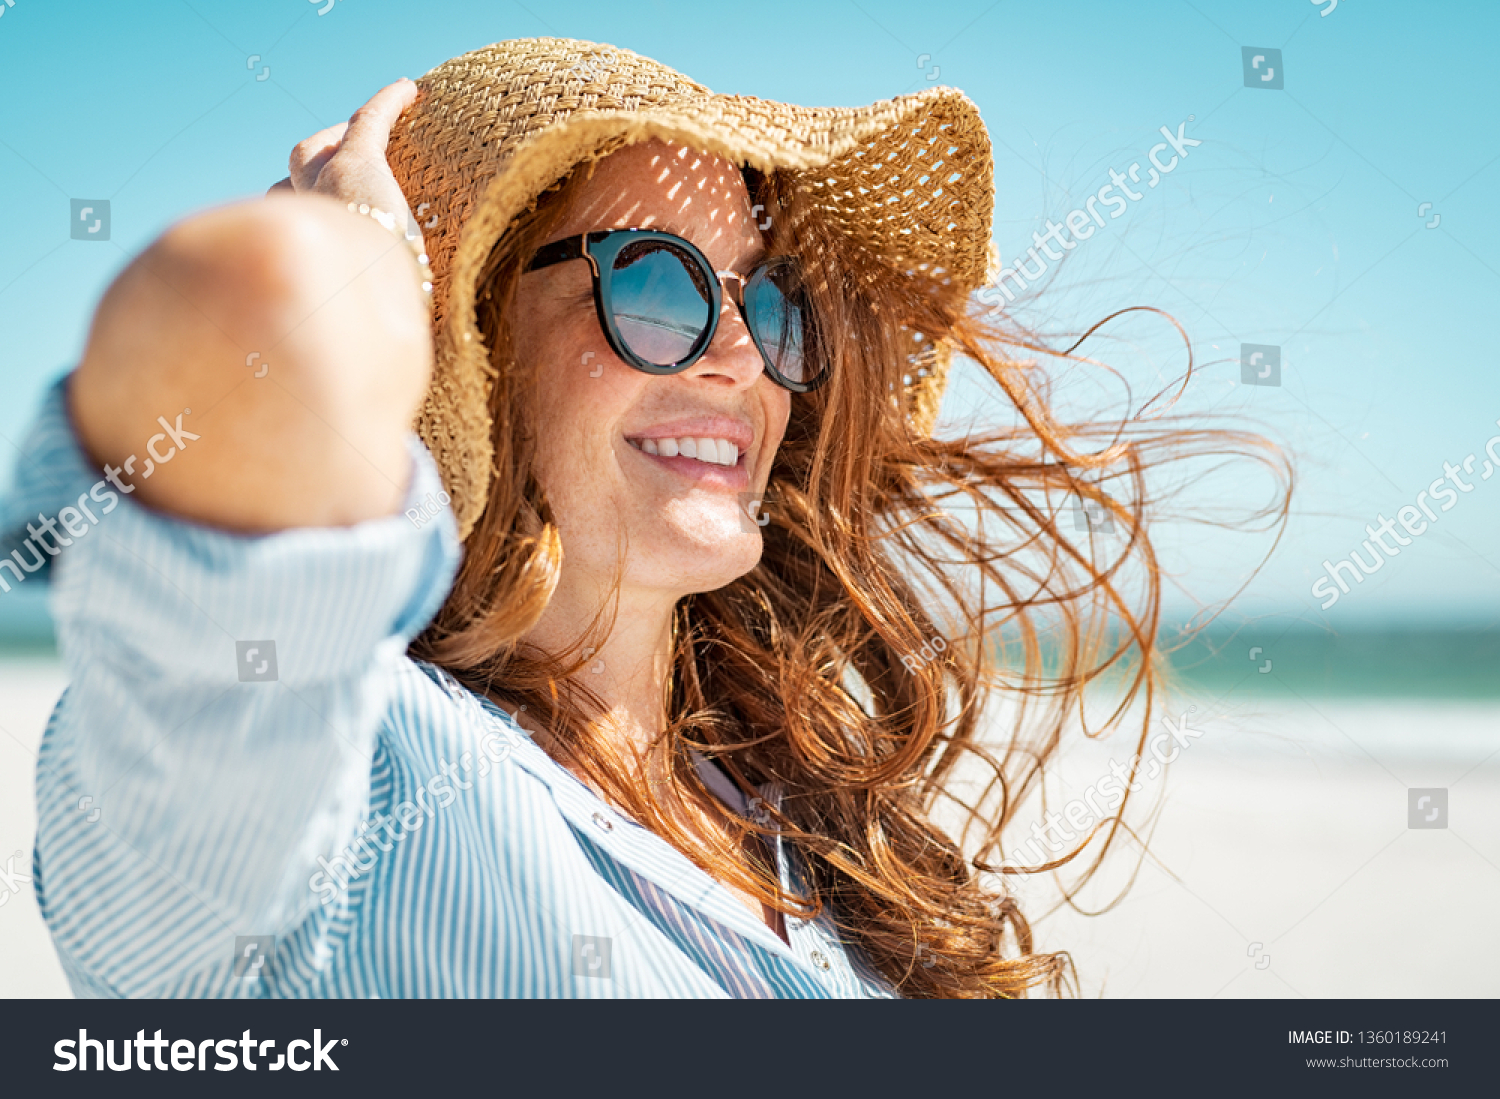 Side view of beautiful mature woman wearing sunglasses at beach. Young smiling woman on vacation looking away while enjoying sea breeze wearing straw hat. Closeup portrait of attractive girl relaxing. #1360189241